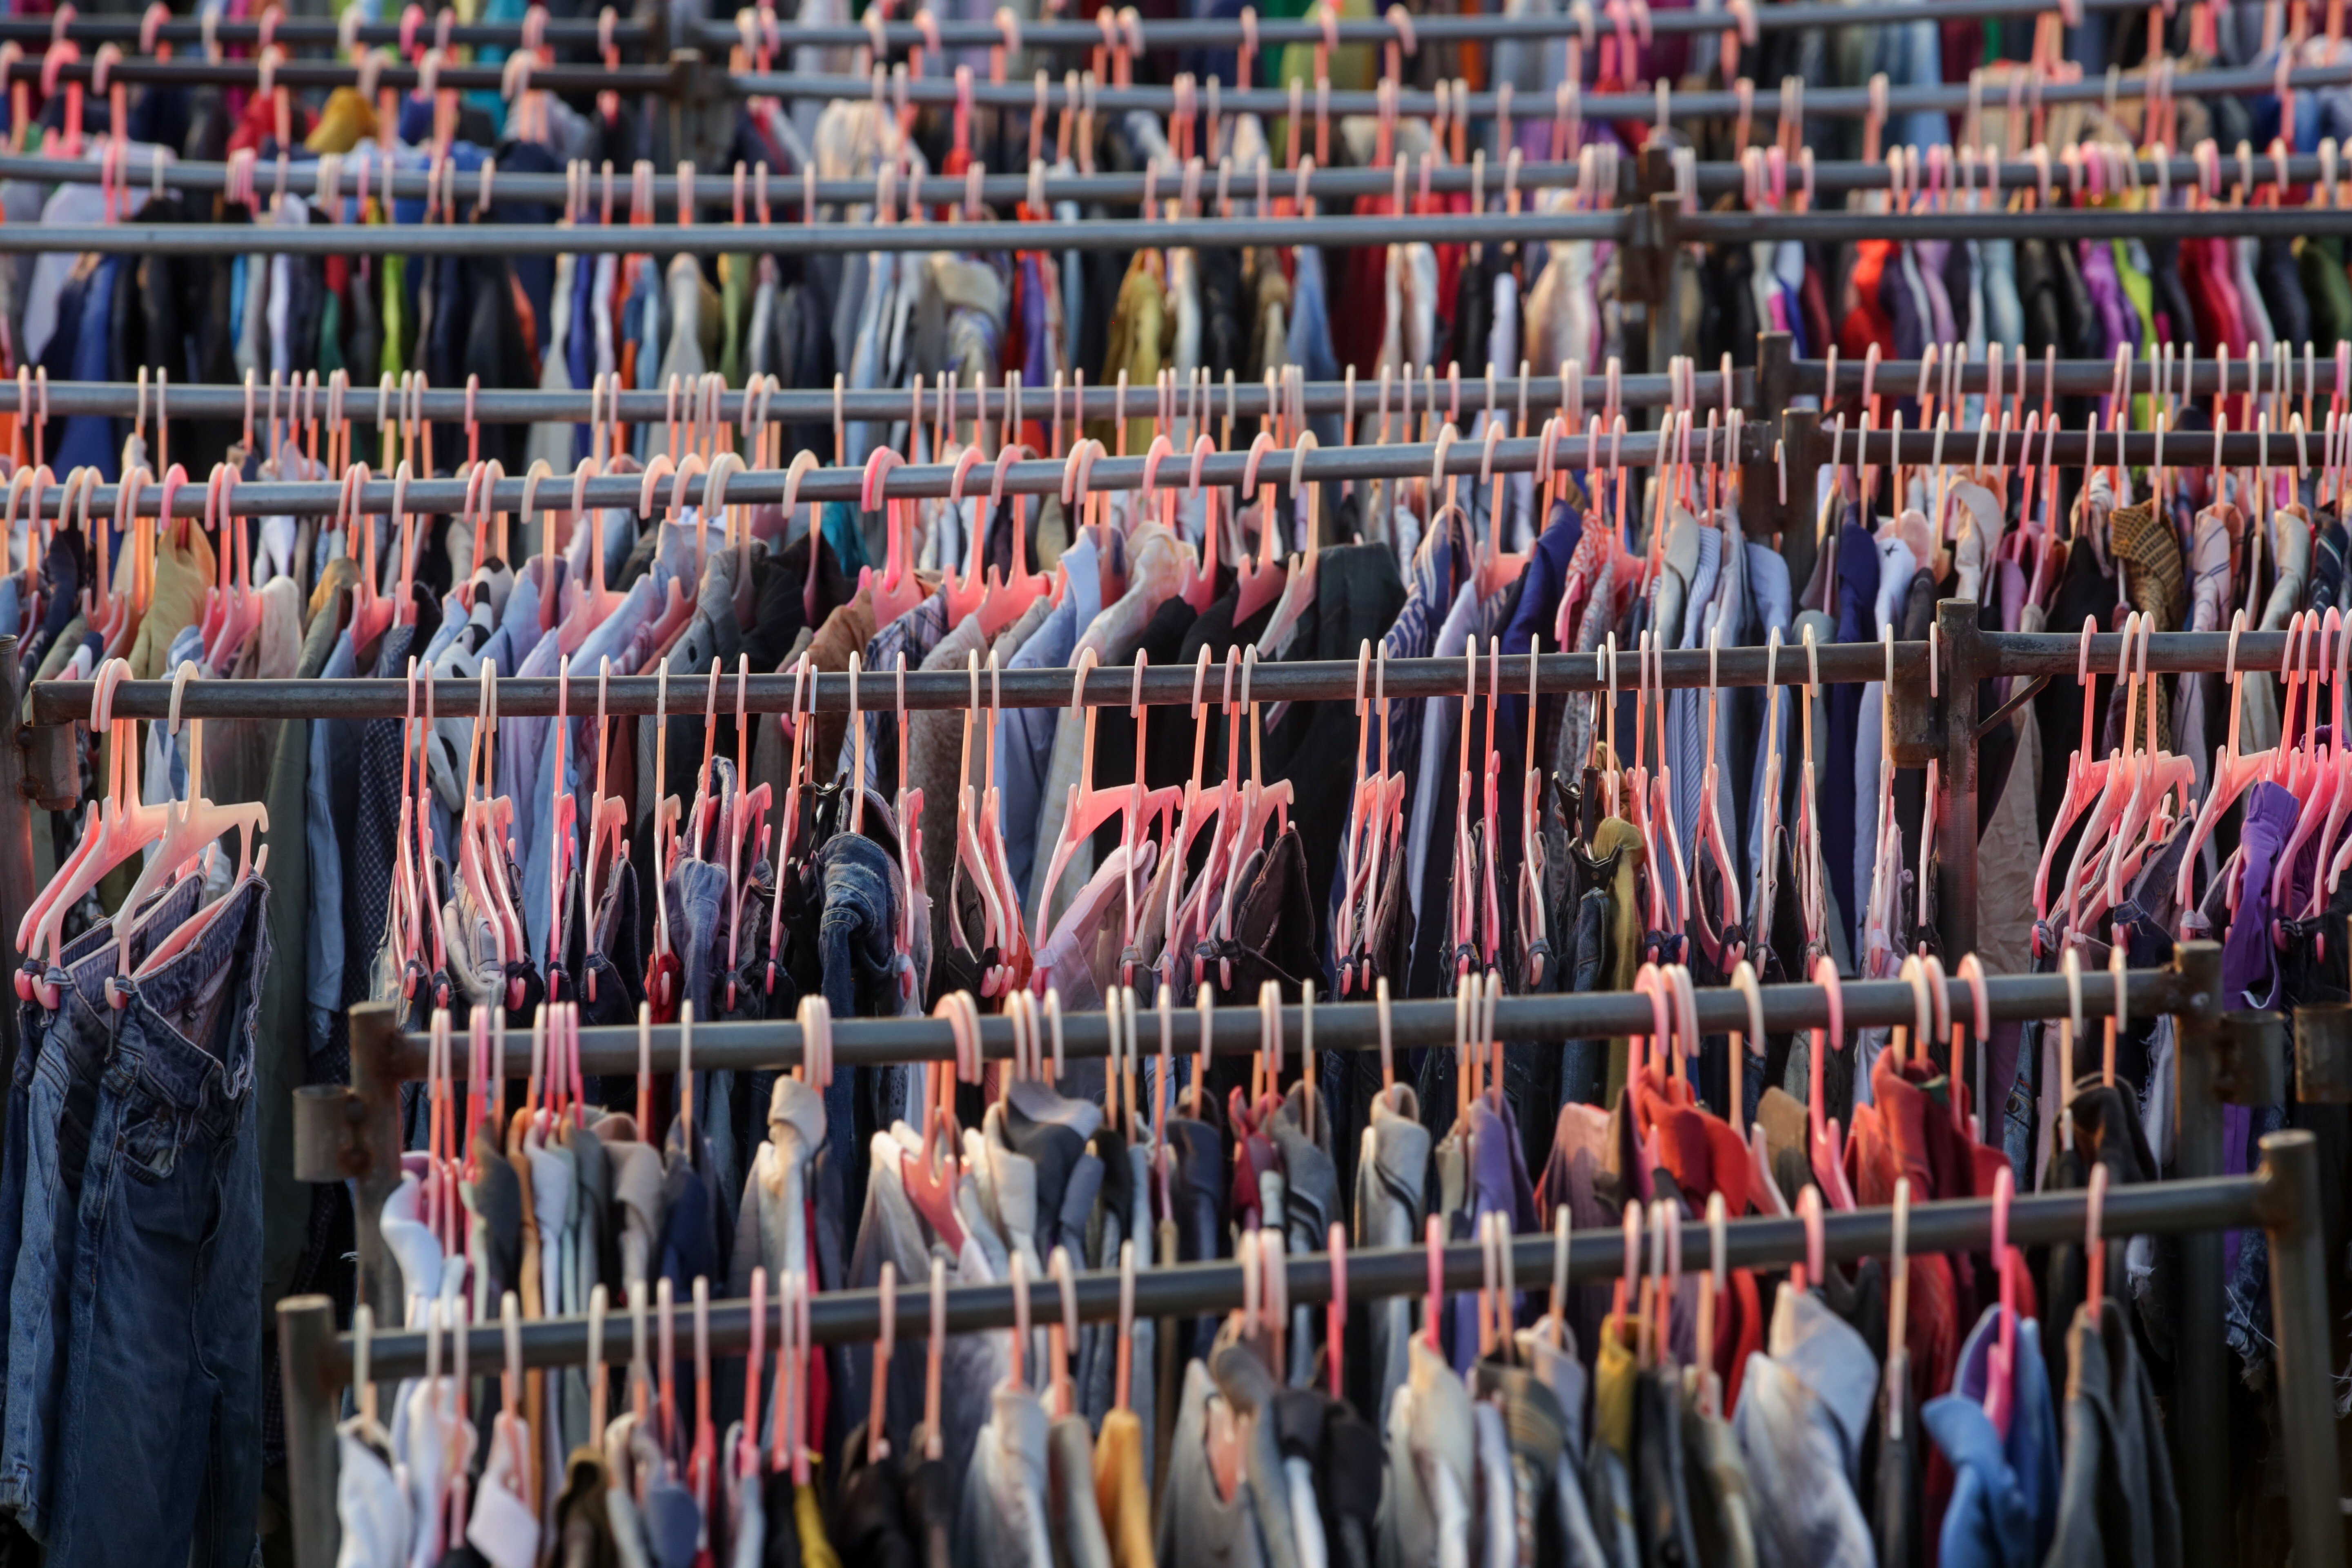 The fashion industry produces 10 per cent of global carbon emissions, and is on track to use up a quarter of the world’s carbon budget by 2050. Photo: Shutterstock